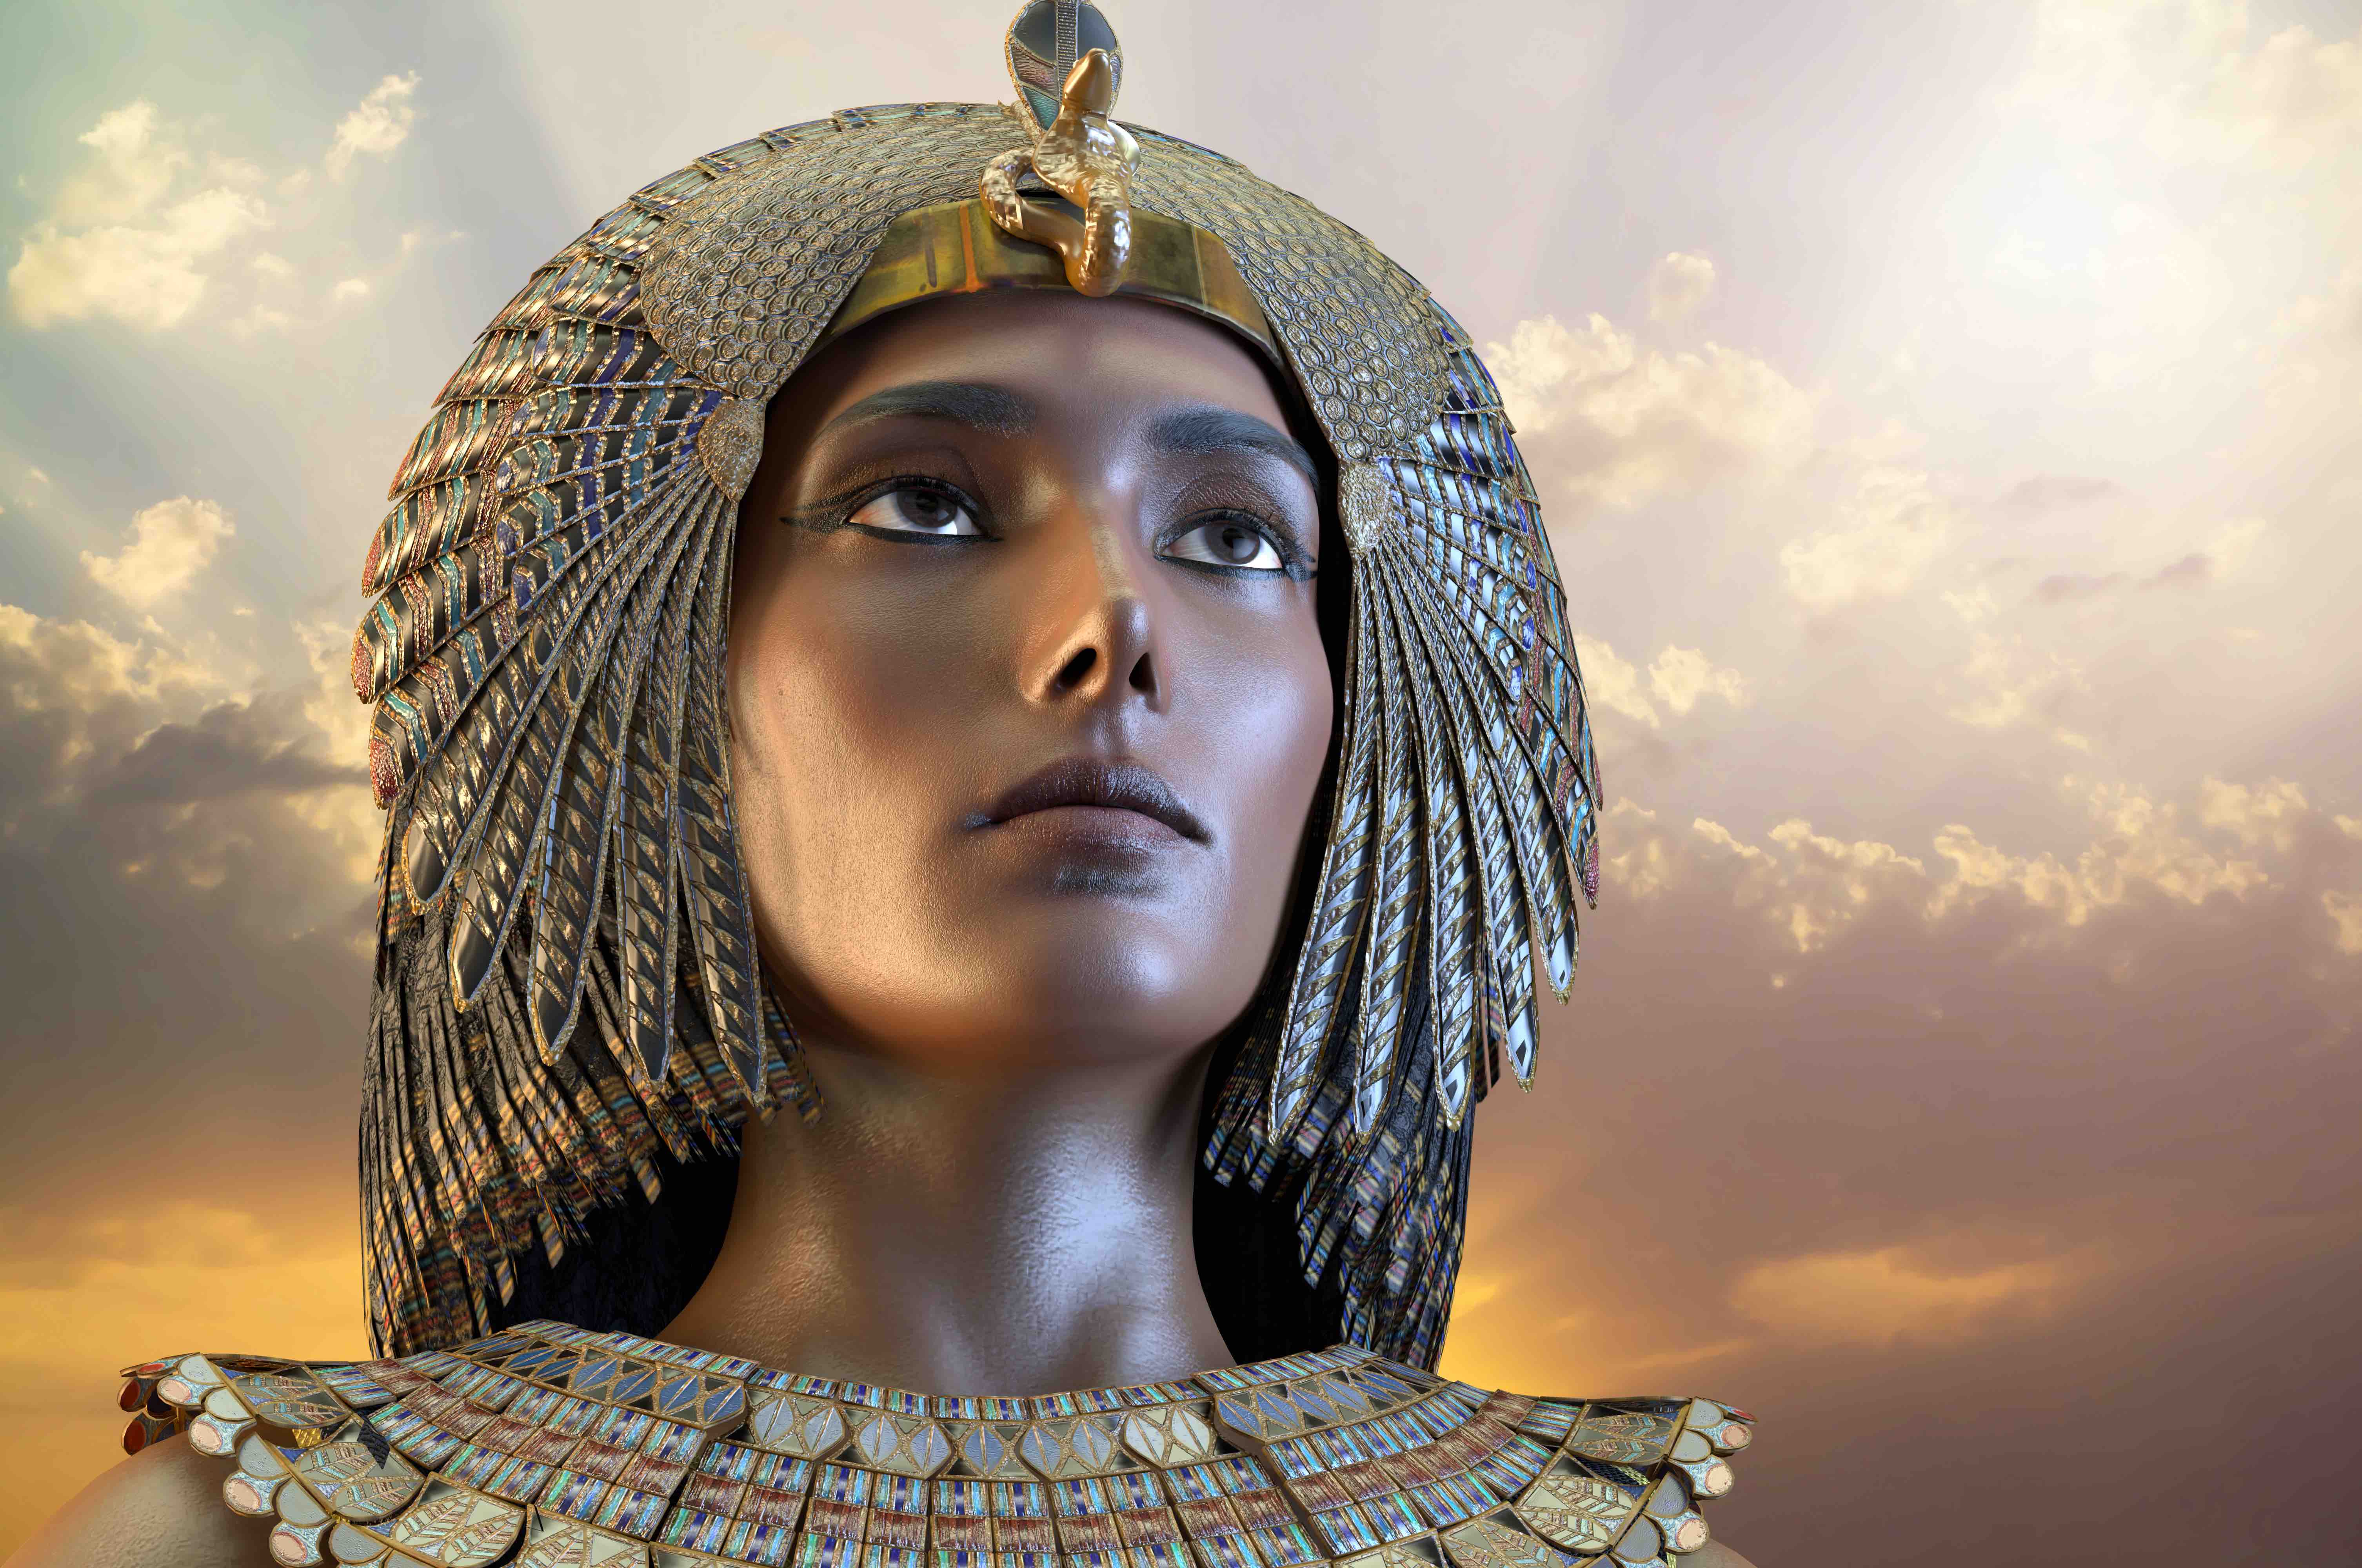 Cleopatra: Biography of the last pharaoh of ancient Egypt